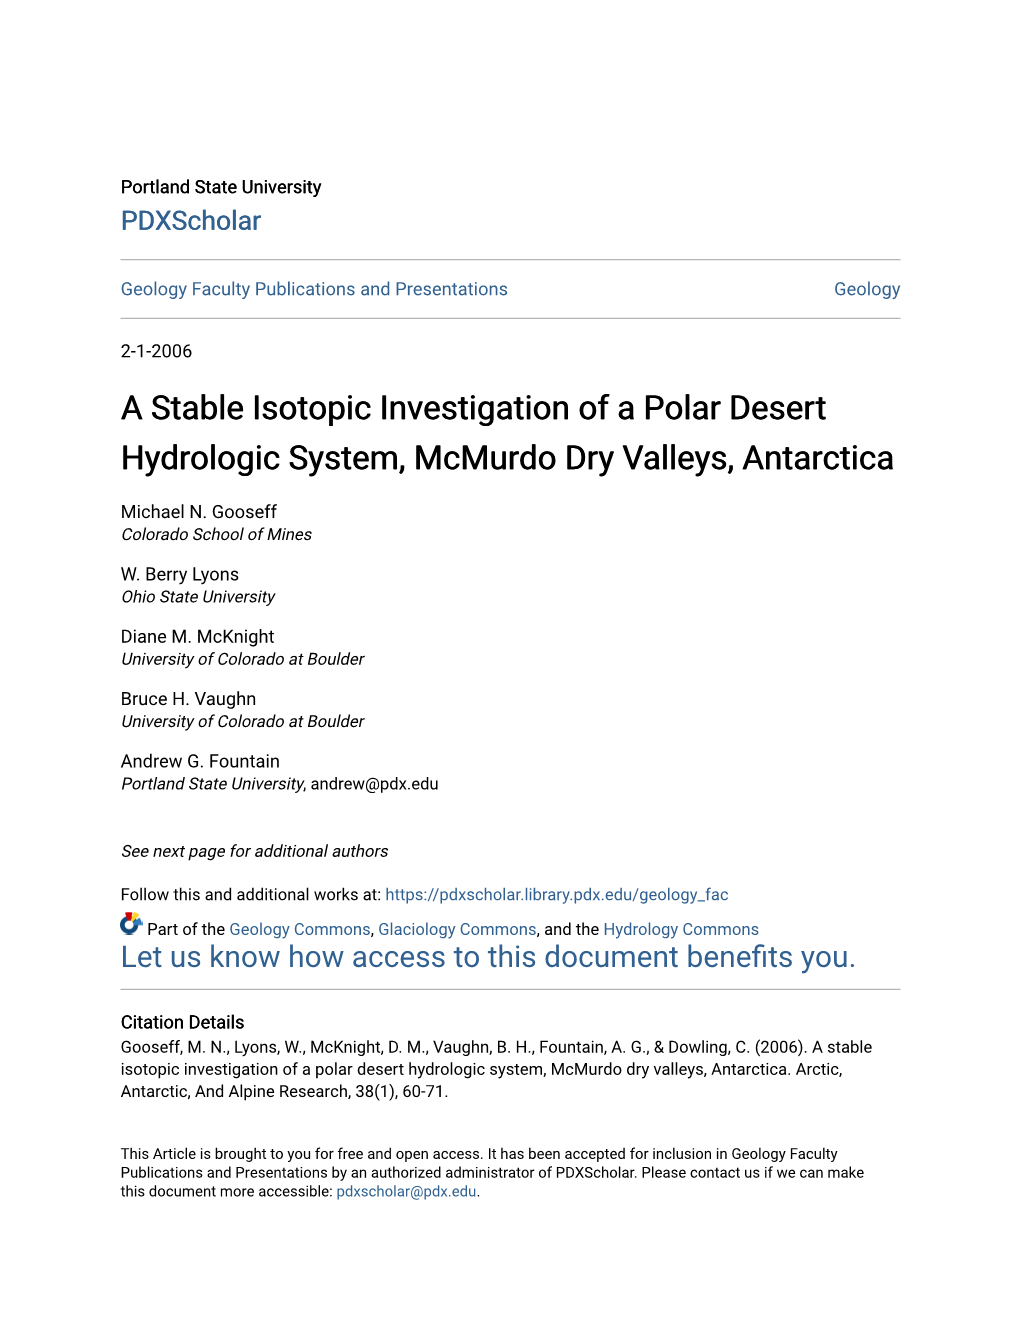 A Stable Isotopic Investigation of a Polar Desert Hydrologic System, Mcmurdo Dry Valleys, Antarctica